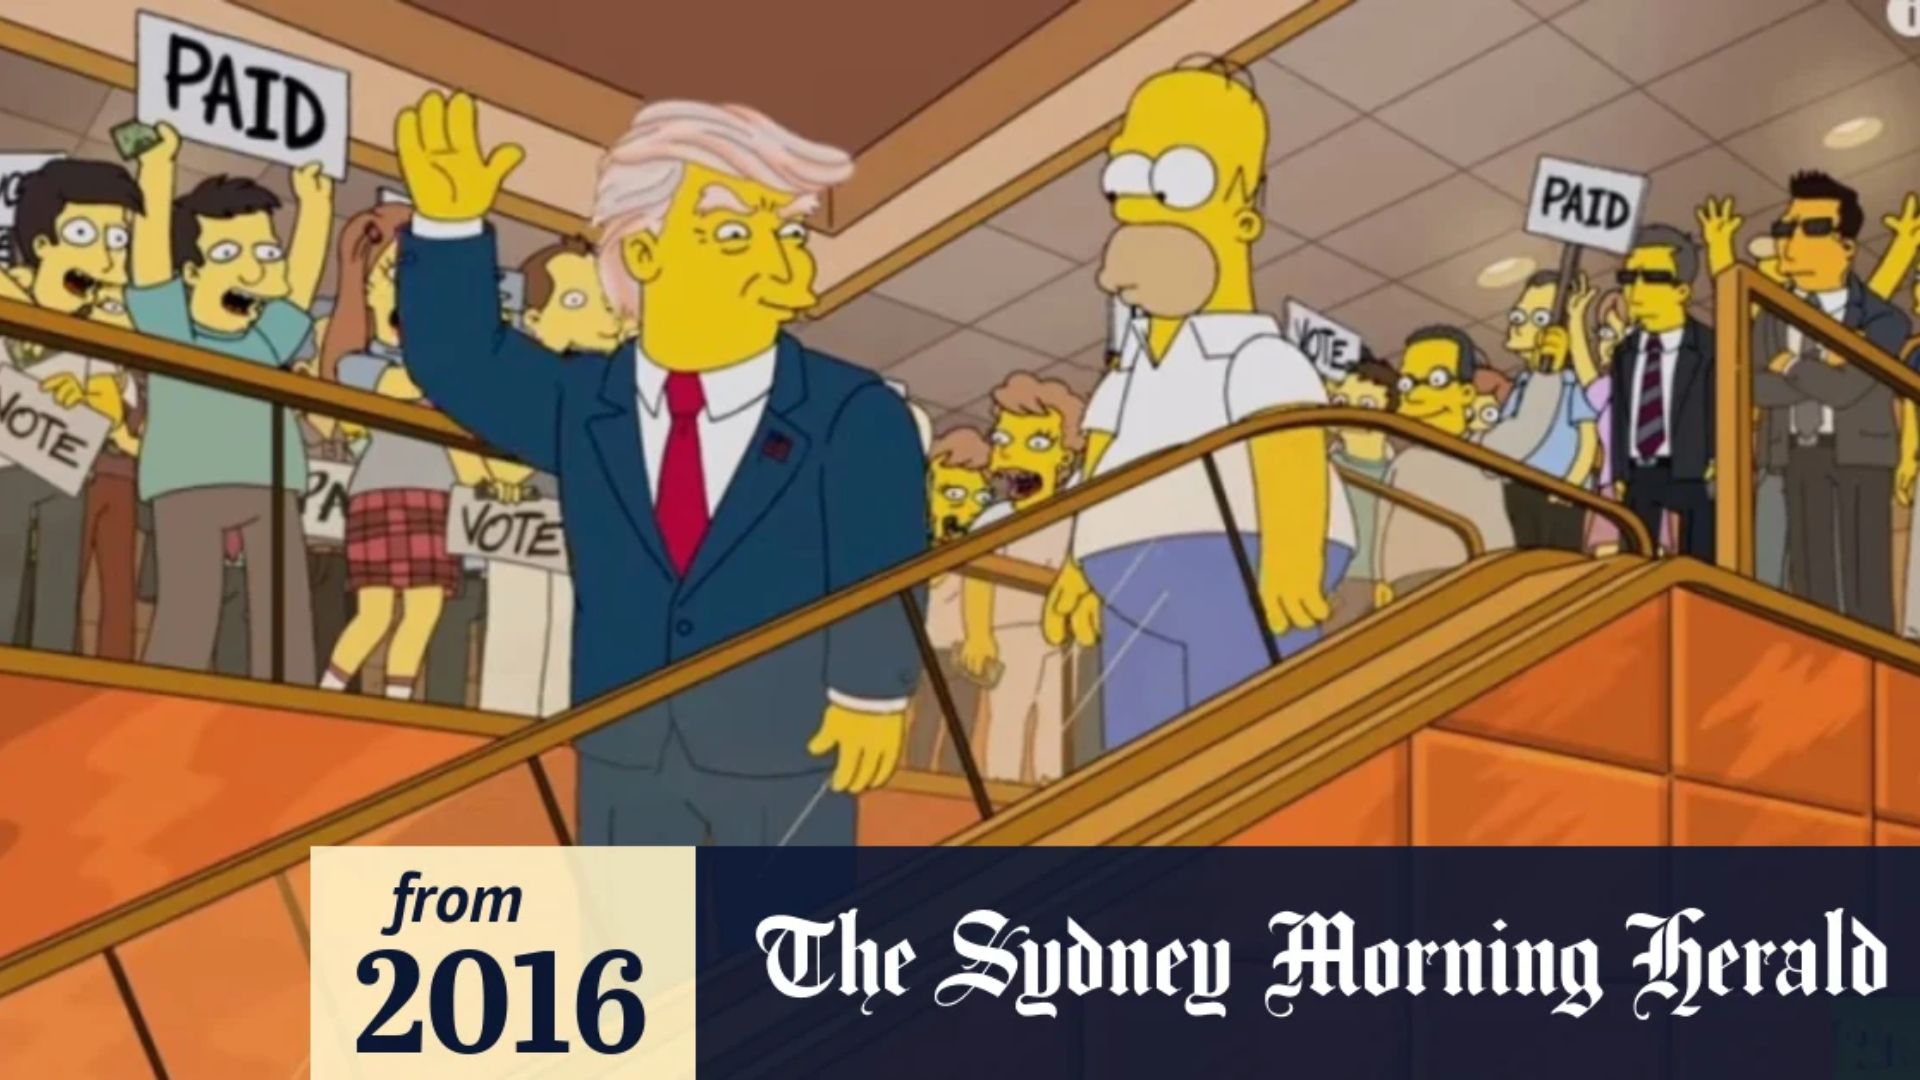 5 times ‘The Simpsons’ predicted the future